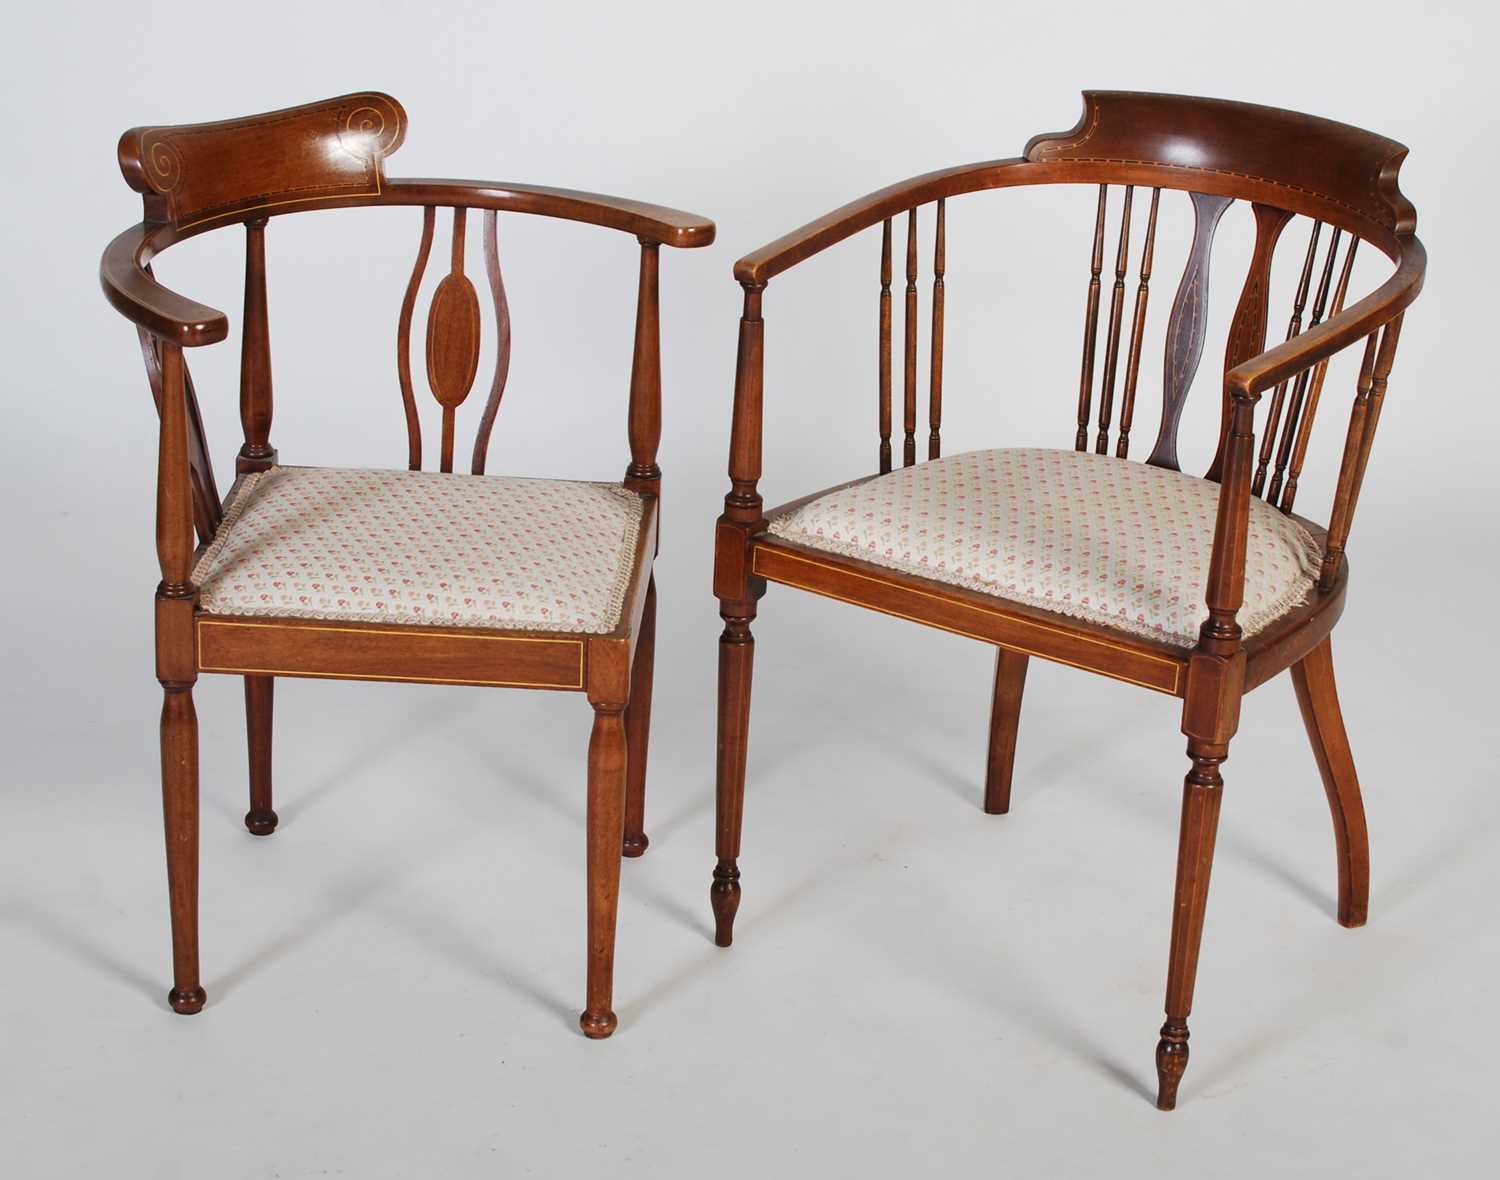 Two Edwardian mahogany chairs, one a horseshoe back armchair with vertical spindle gallery, floral